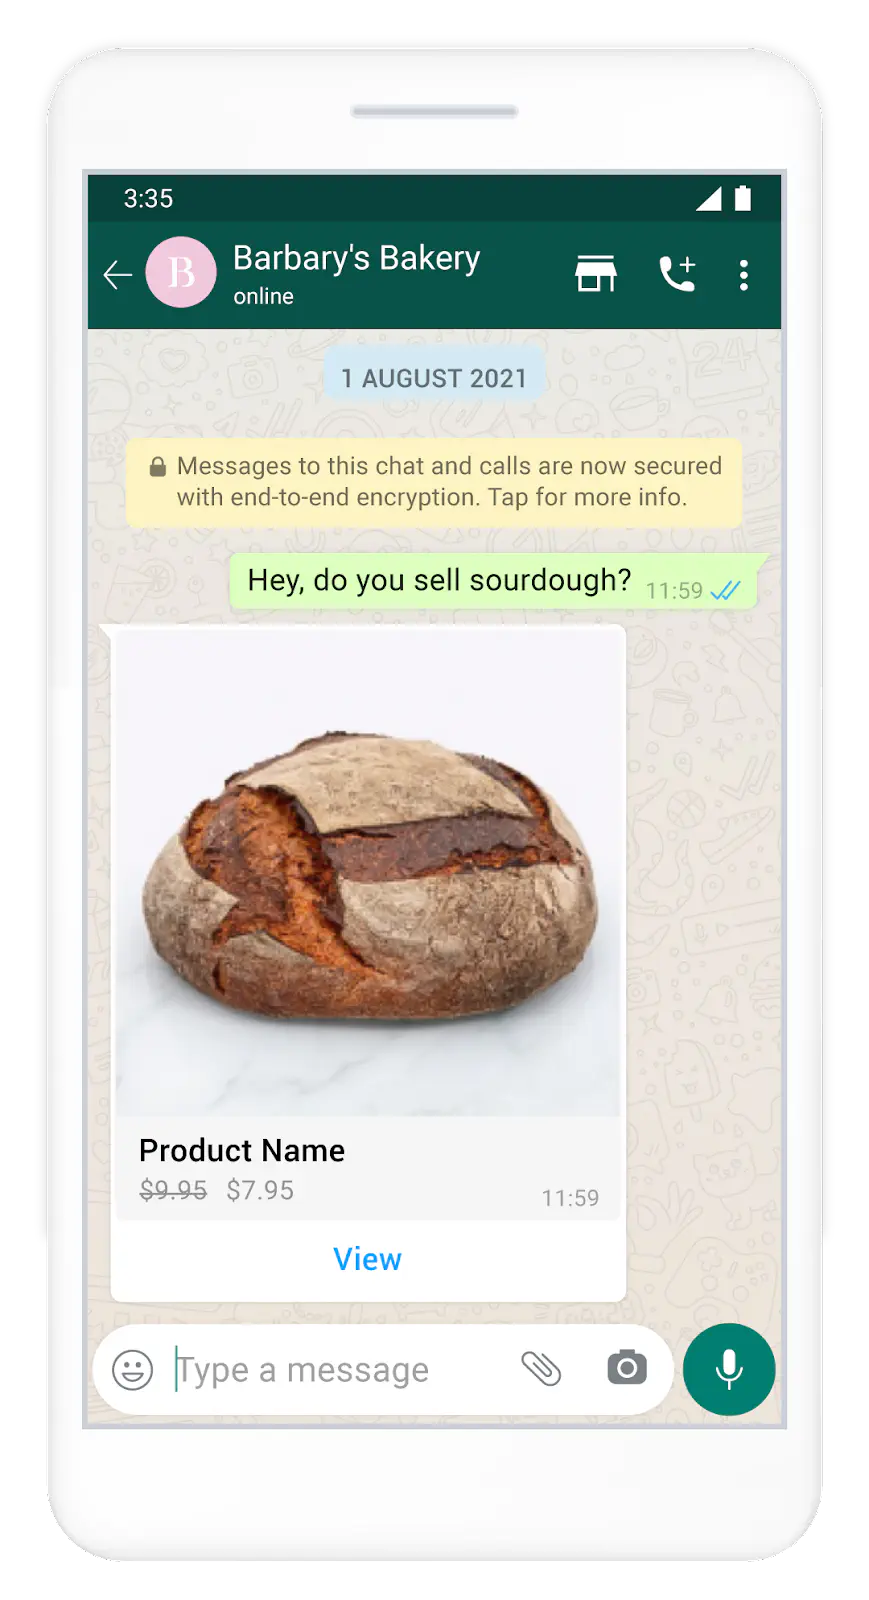 Single product message in a WhatsApp conversation.